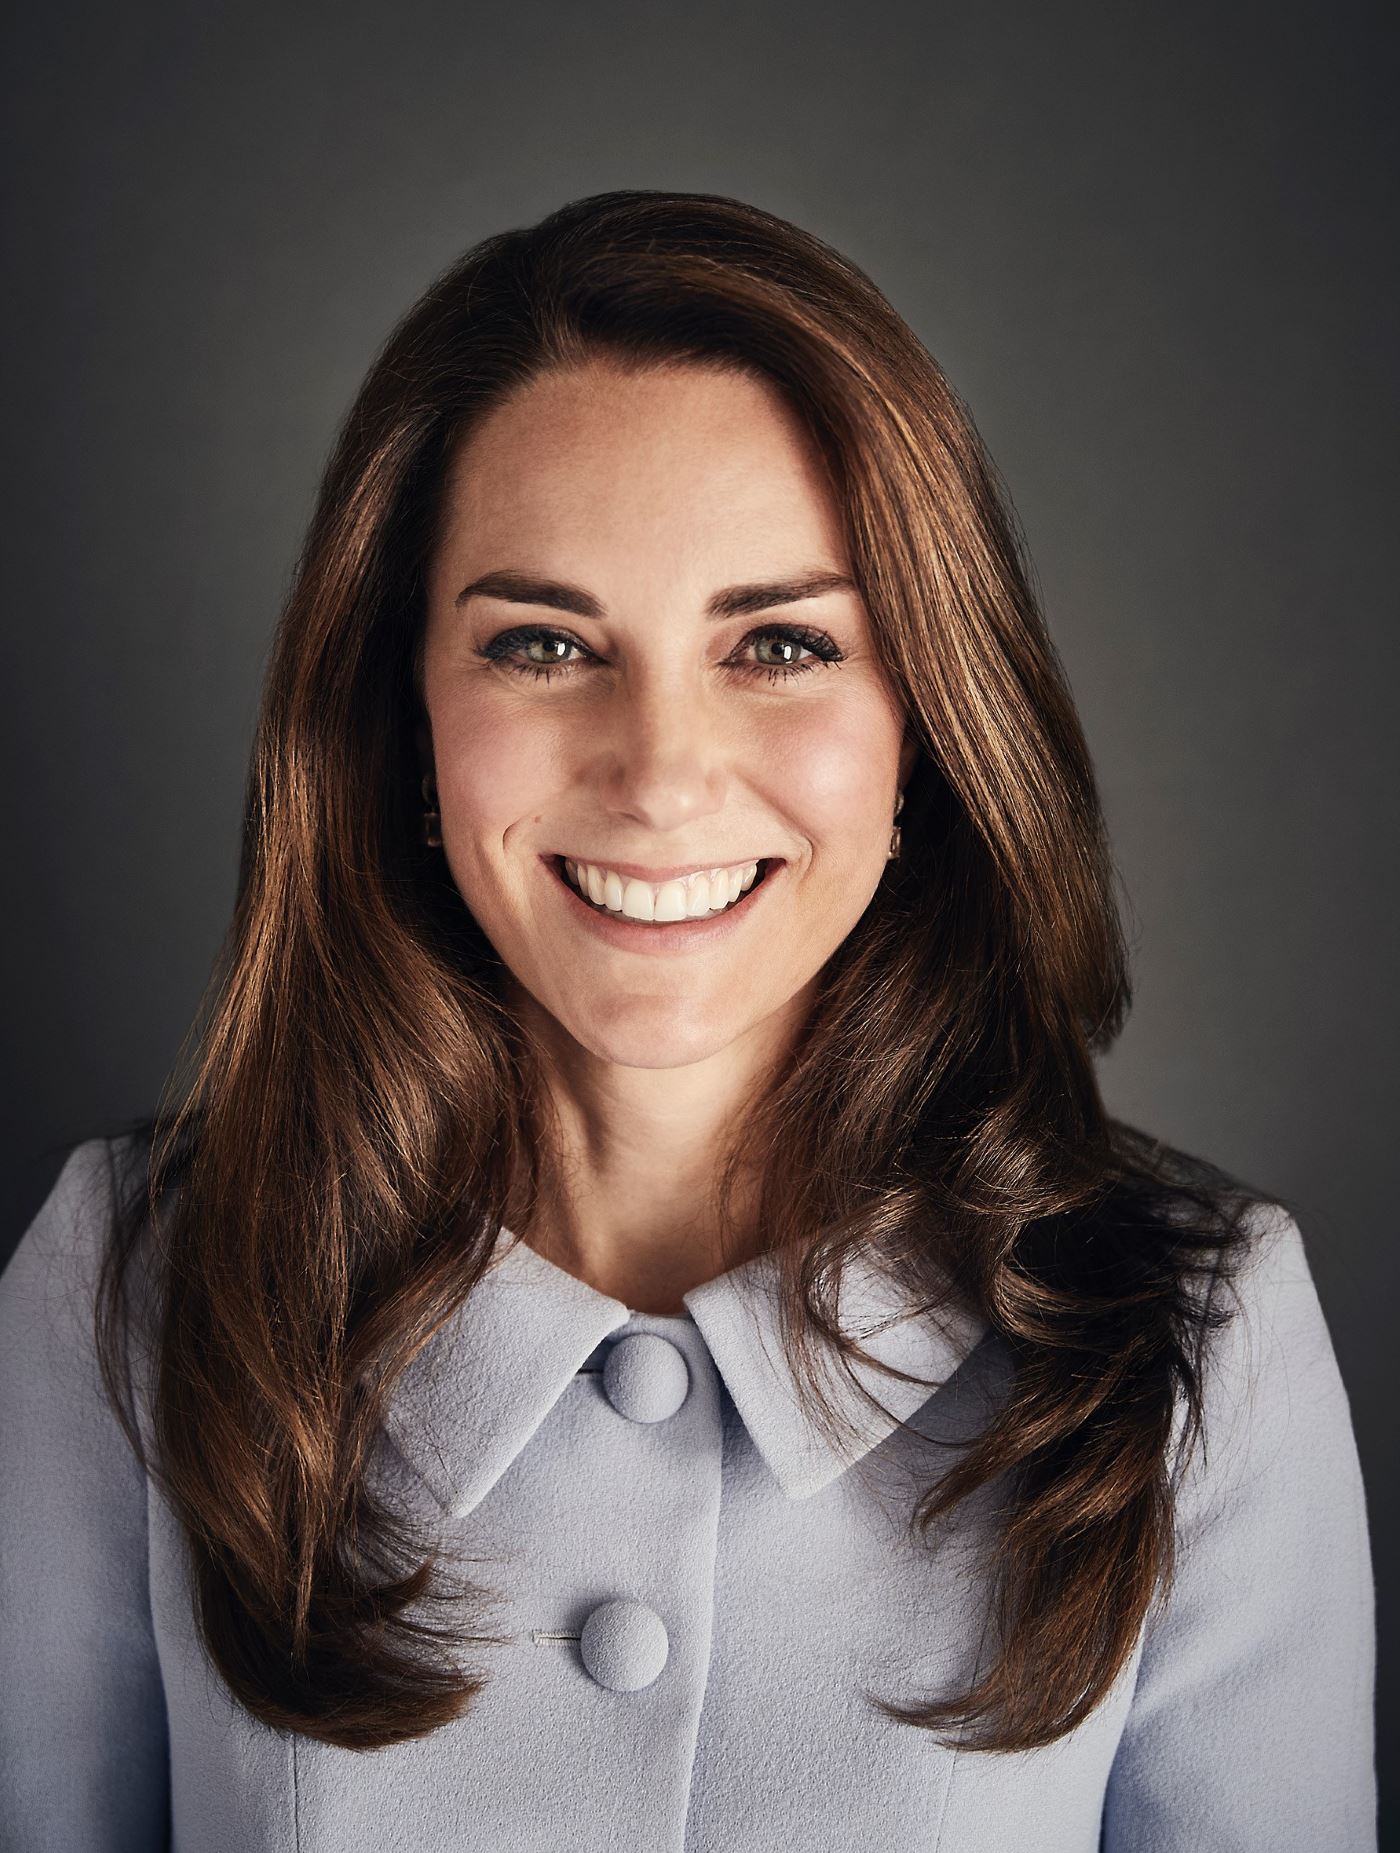 Her Royal Highness The Duchess of Cambridge sends letter of support for ‘remarkable’ children’s hospices